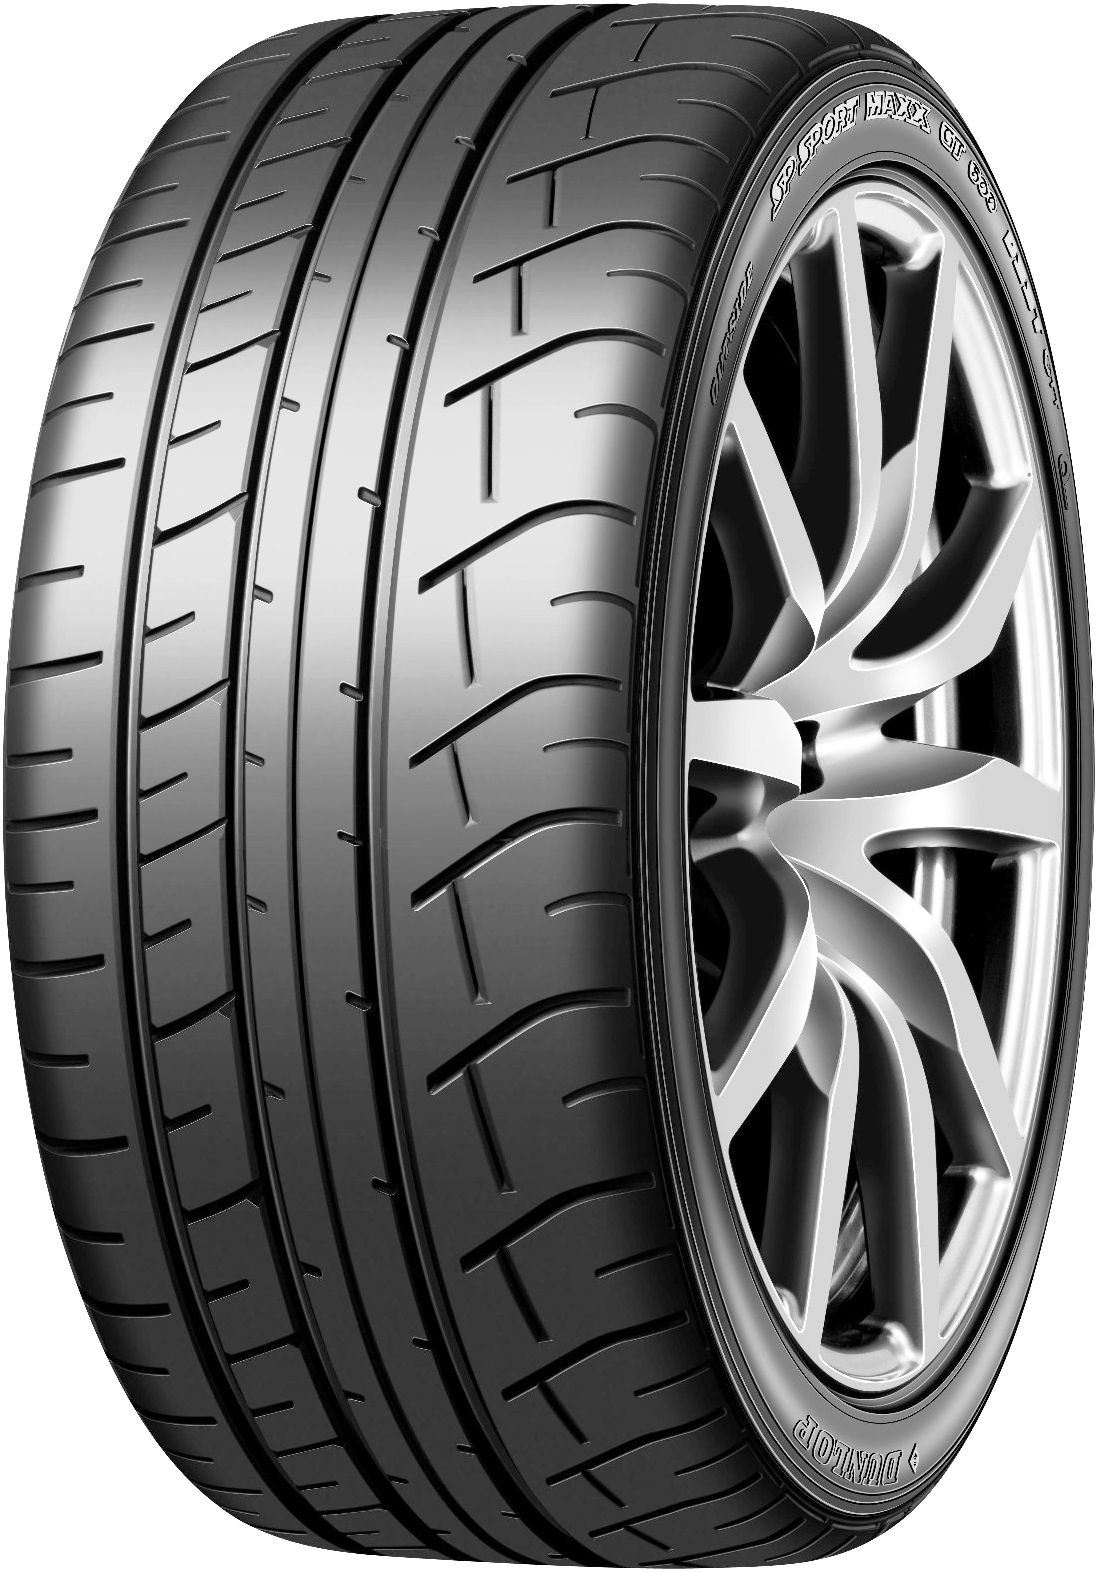 Anvelope auto DUNLOP SP MAXX GT600 NR1 RO RFT DOT 2017 285/35 R20 100Y